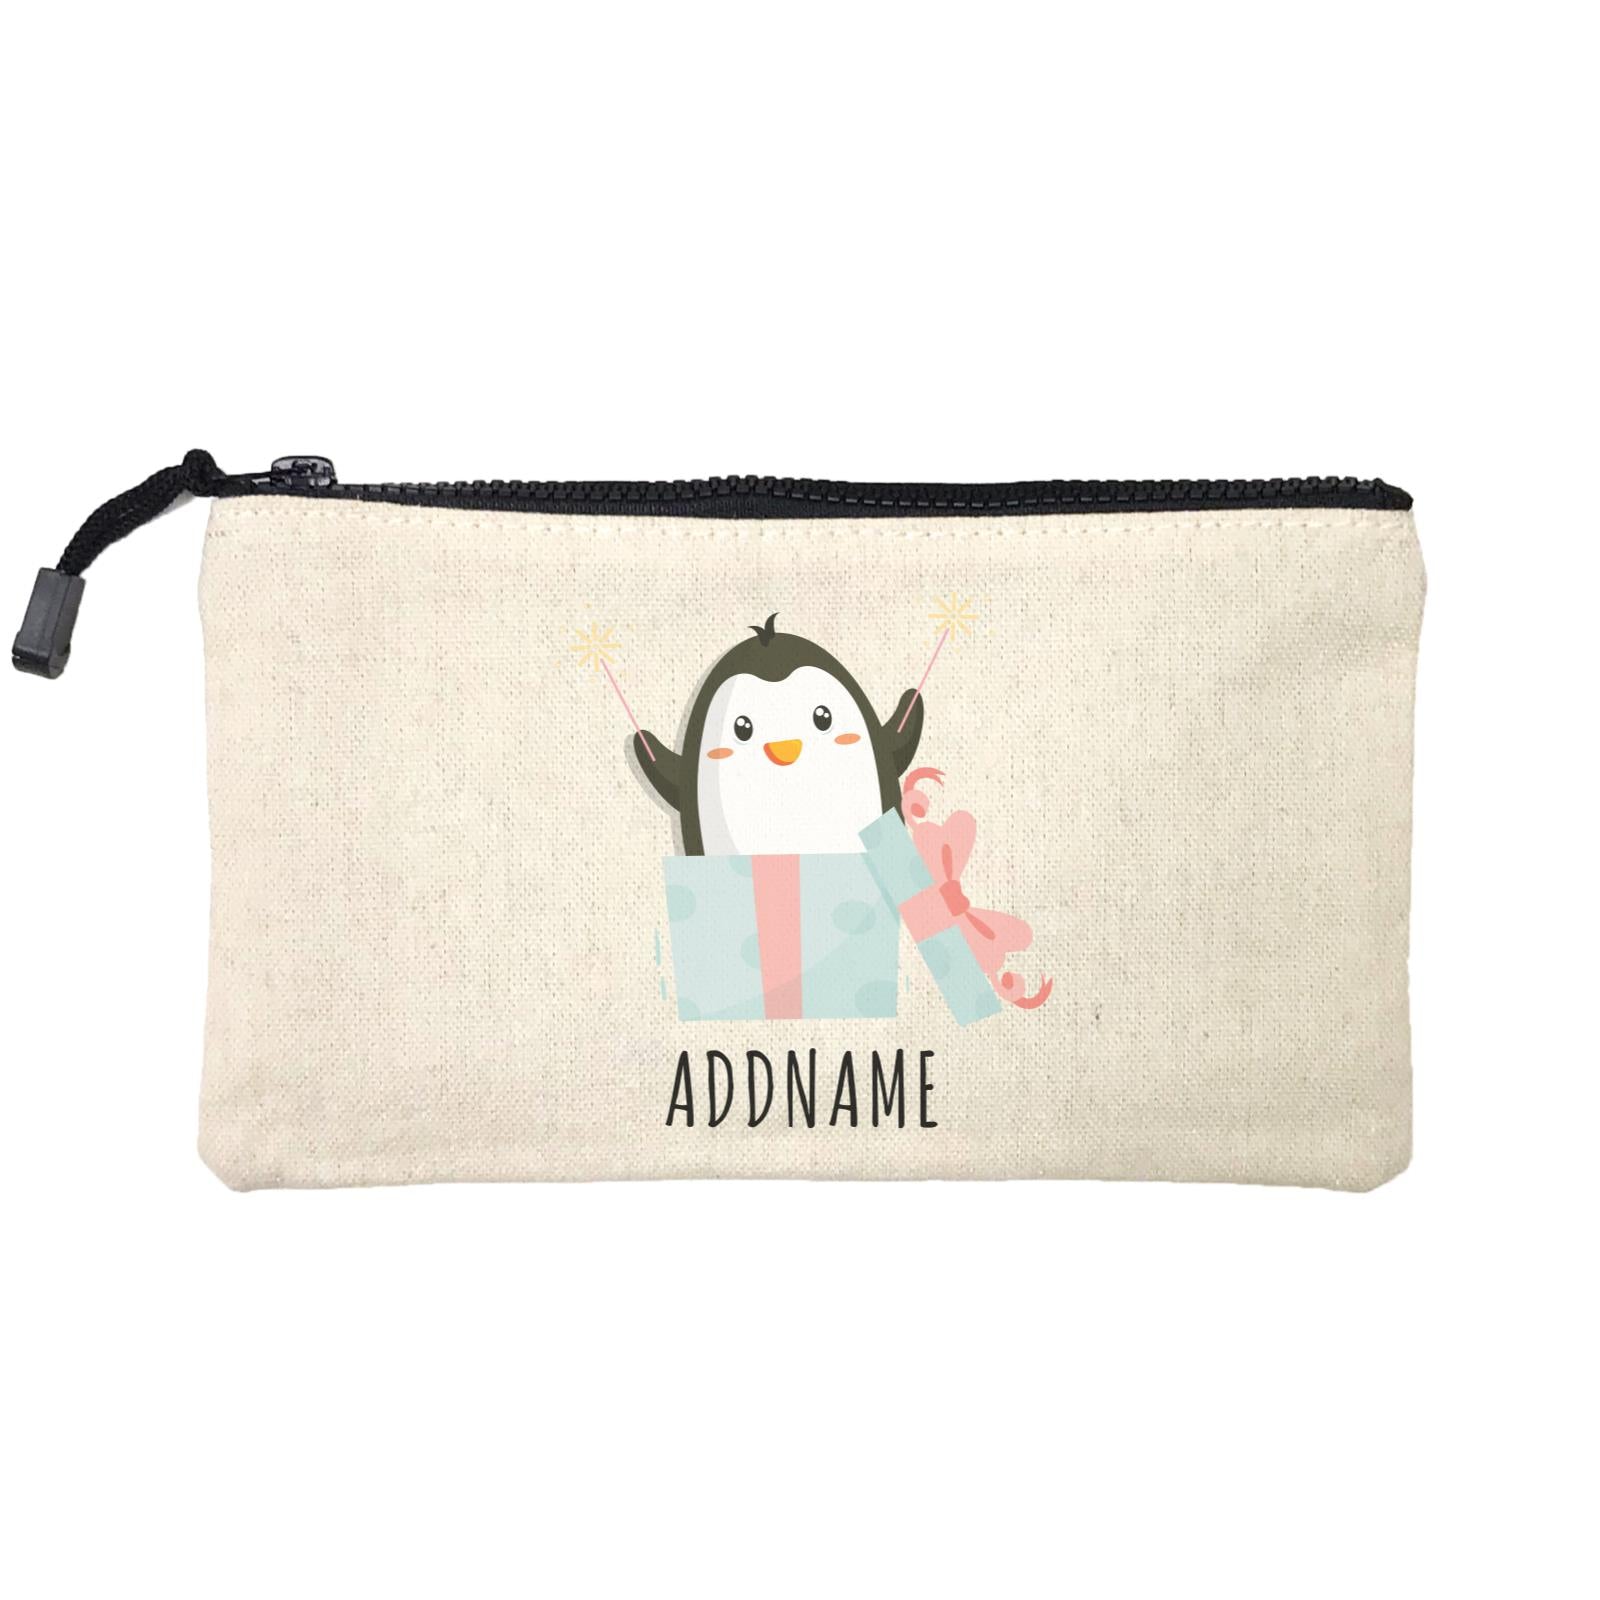 Birthday Cute Penguin Taking Fireworks In Present Box Addname Mini Accessories Stationery Pouch